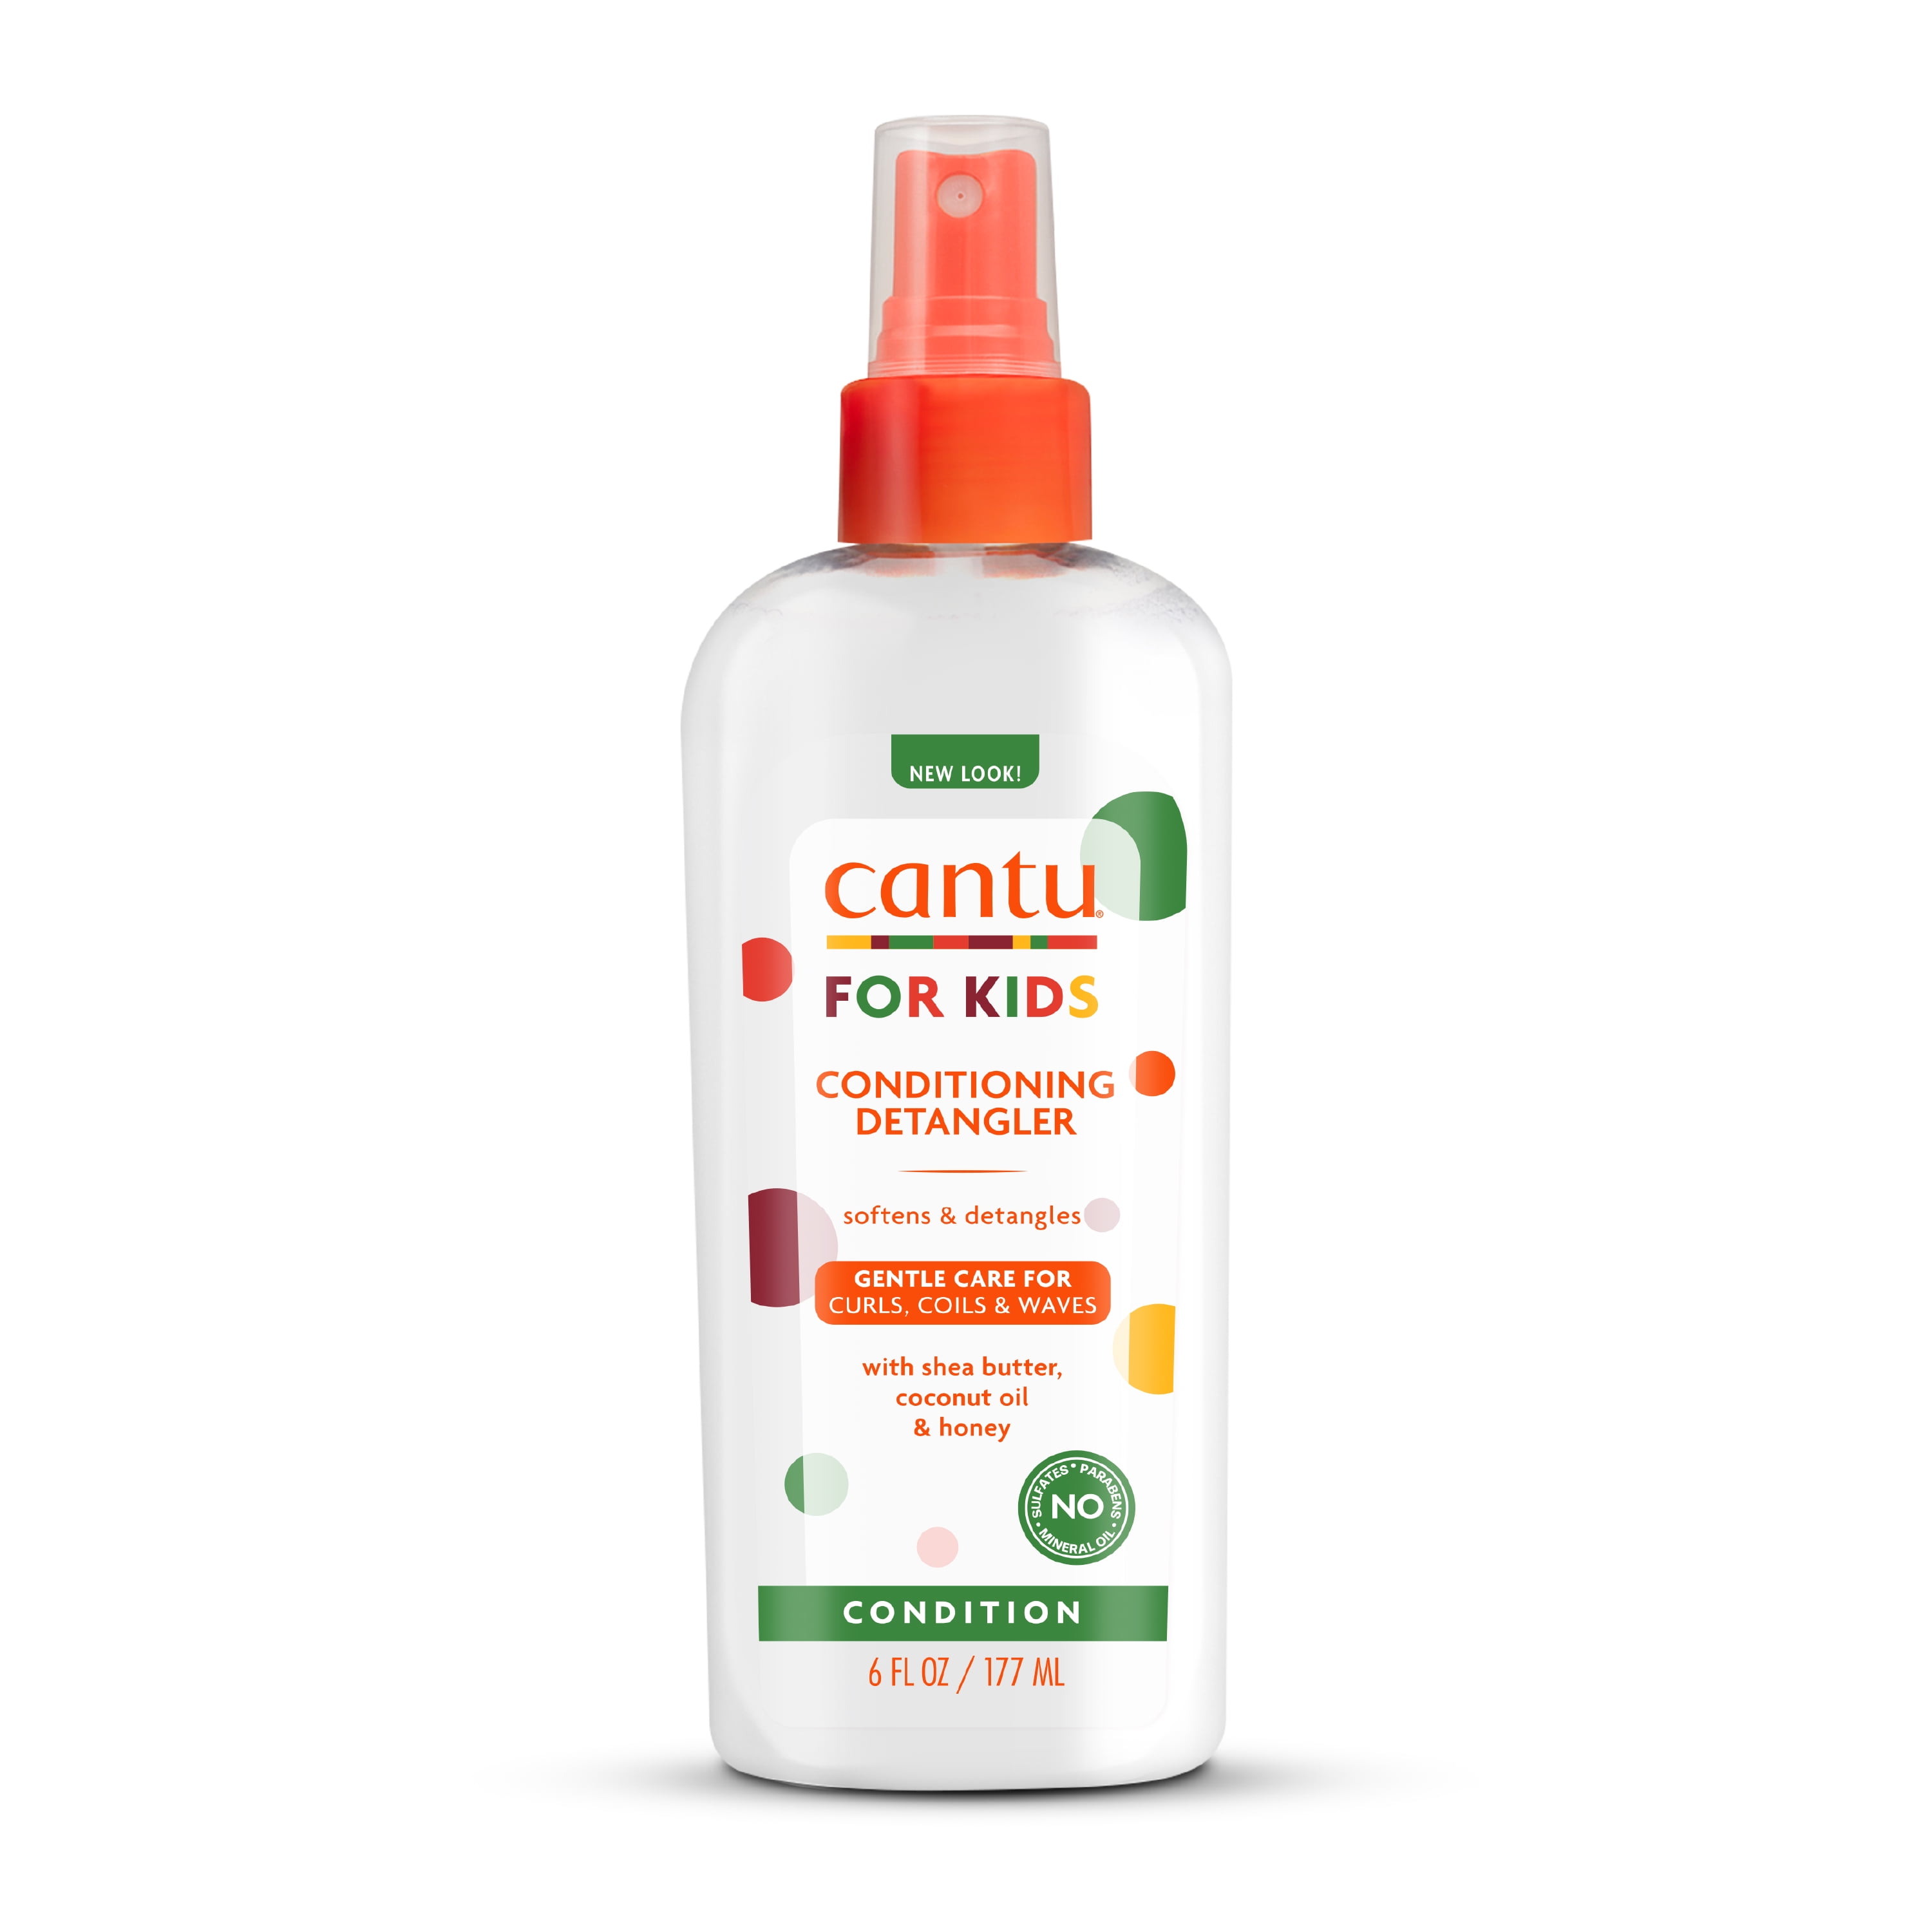 Cantu Care for Kids Paraben & Sulfate-Free Conditioning Detangler with Shea Butter, 6 fl oz